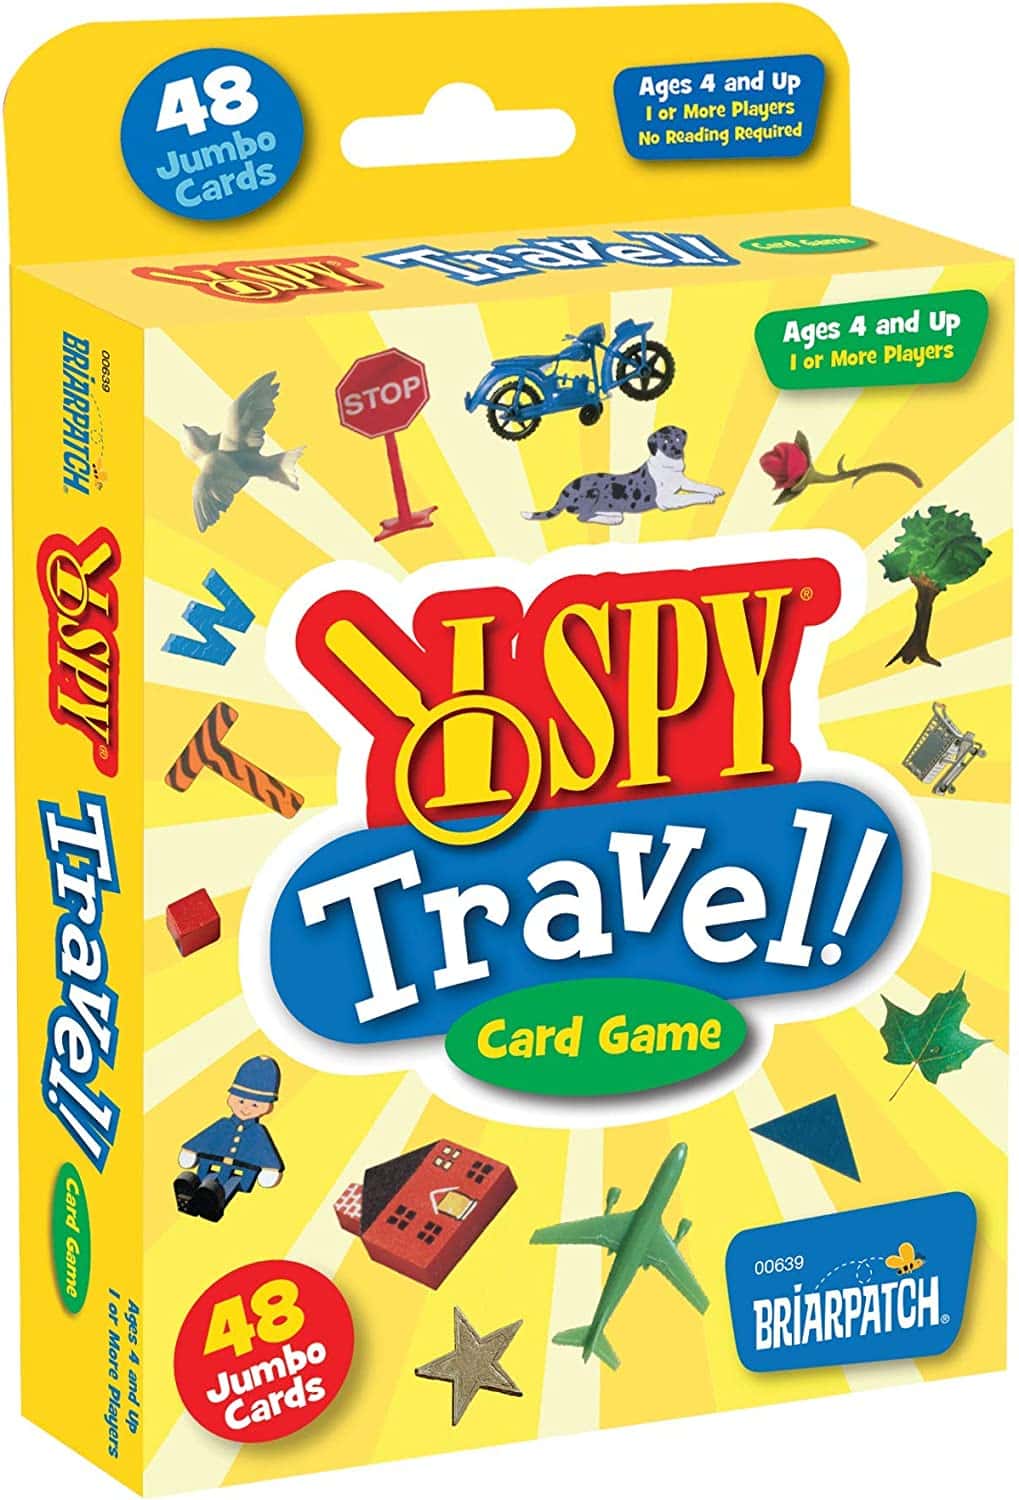 I Spy card game for road trips